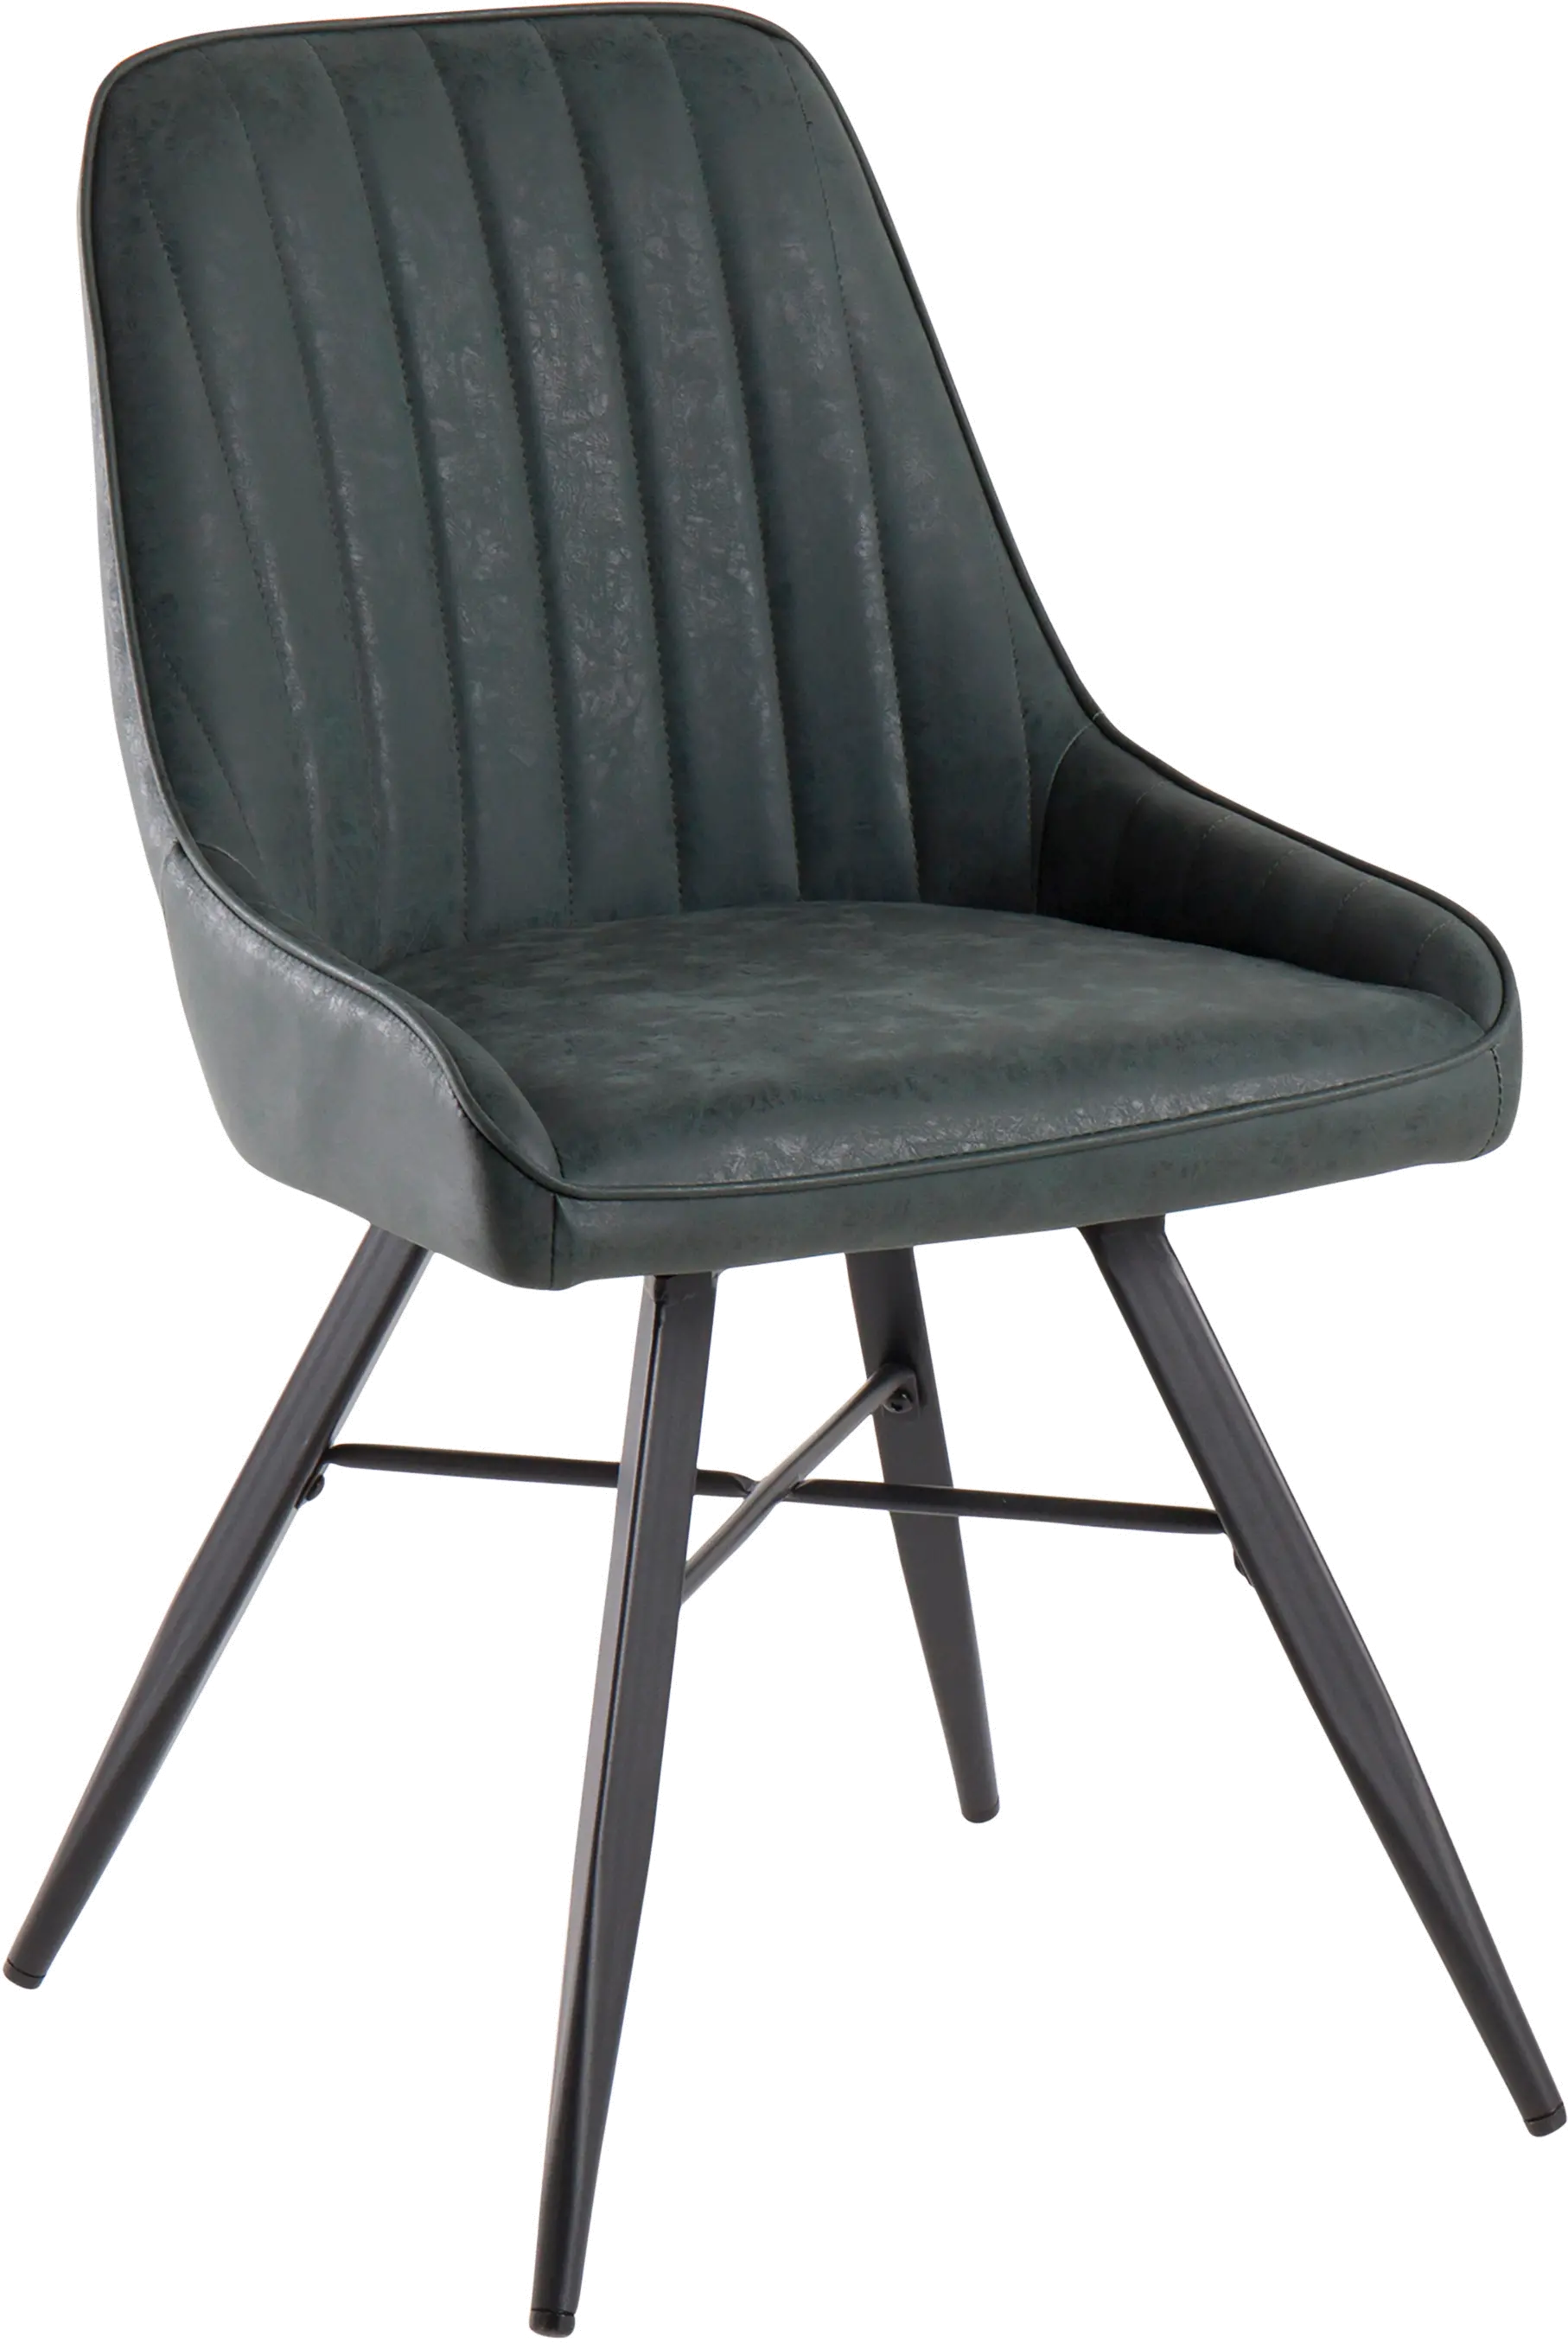 Cavalier Gray Green Faux Leather Swiveling Chair